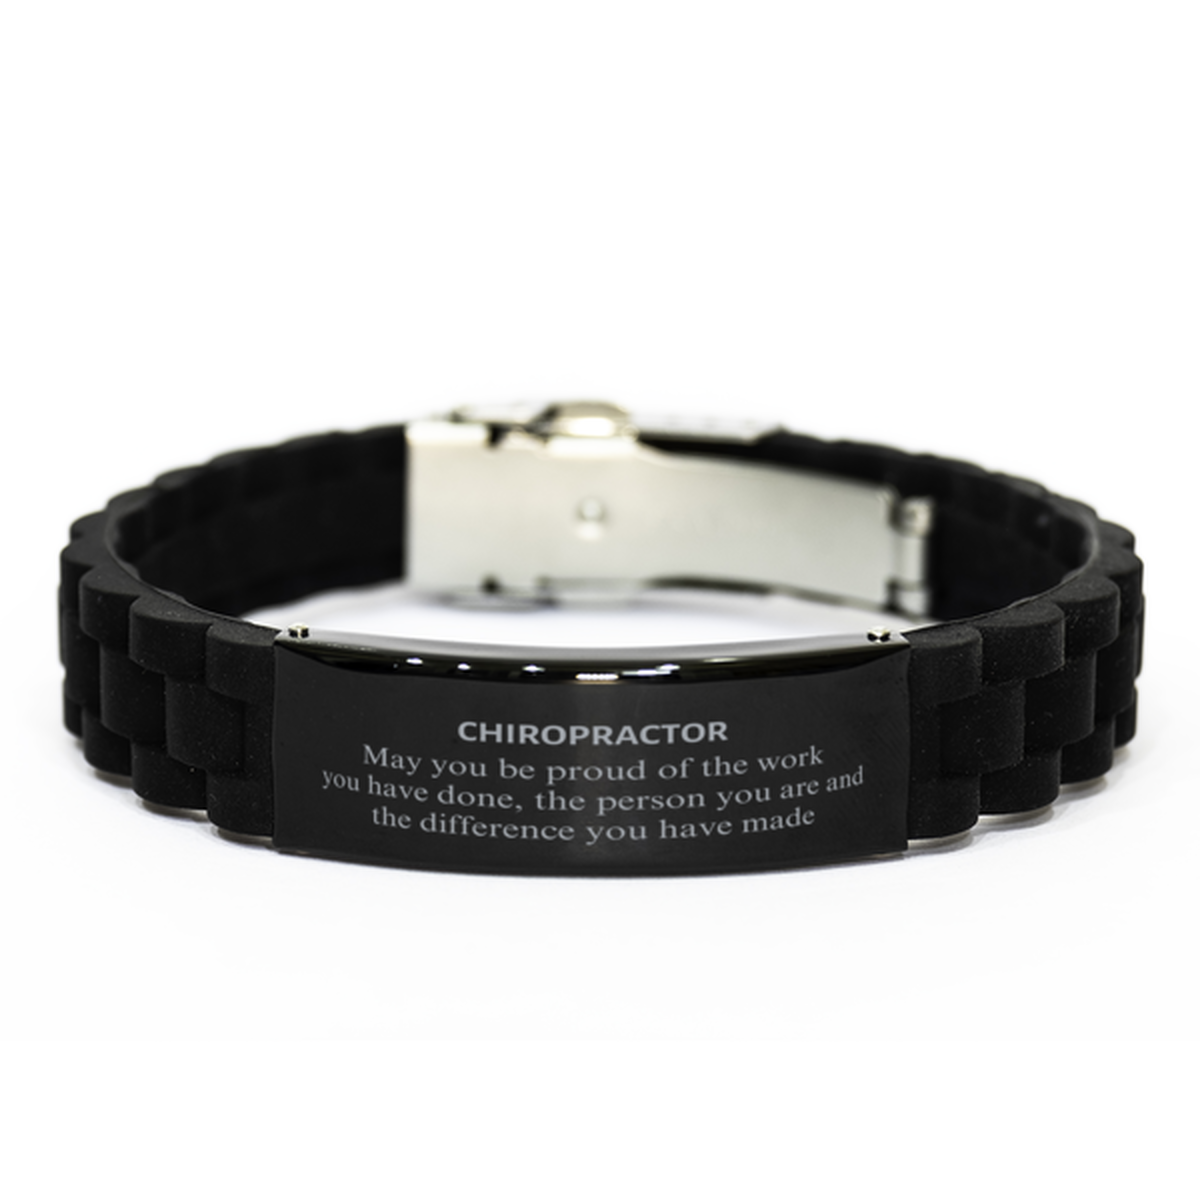 Chiropractor May you be proud of the work you have done, Retirement Chiropractor Black Glidelock Clasp Bracelet for Colleague Appreciation Gifts Amazing for Chiropractor